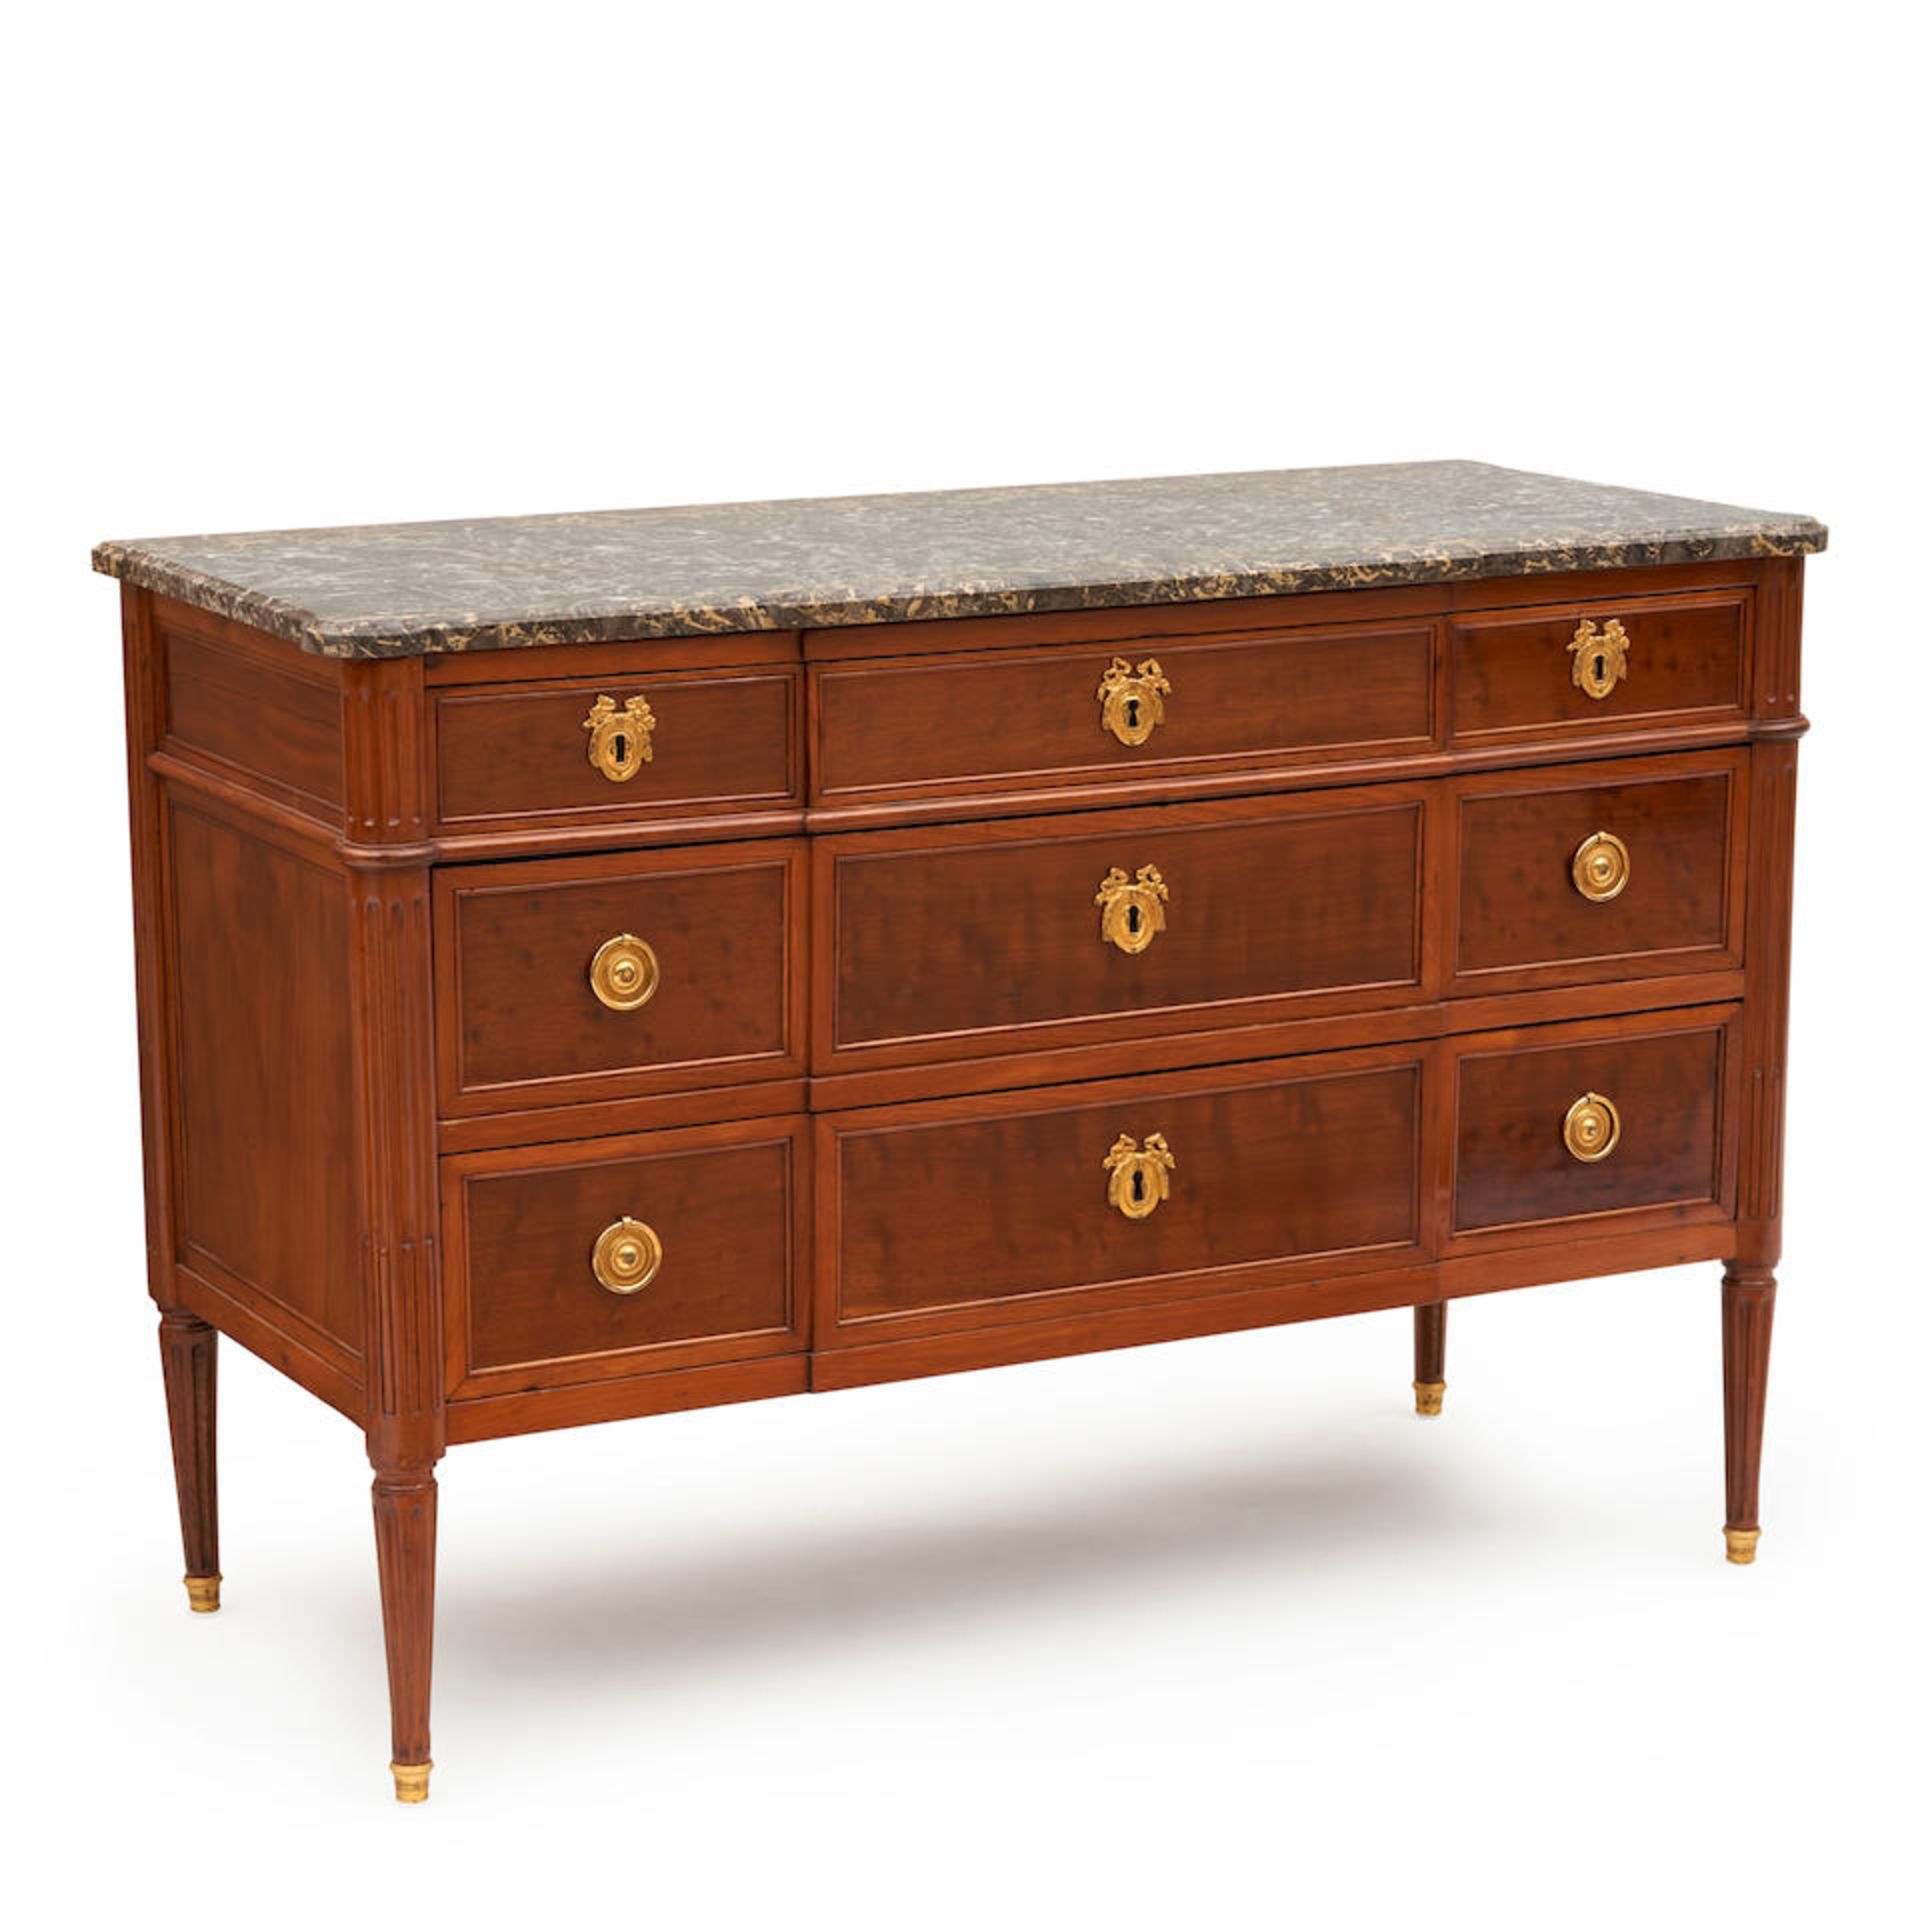 Louis XVI Mahogany Marble-top Commode, France, late 18th century.